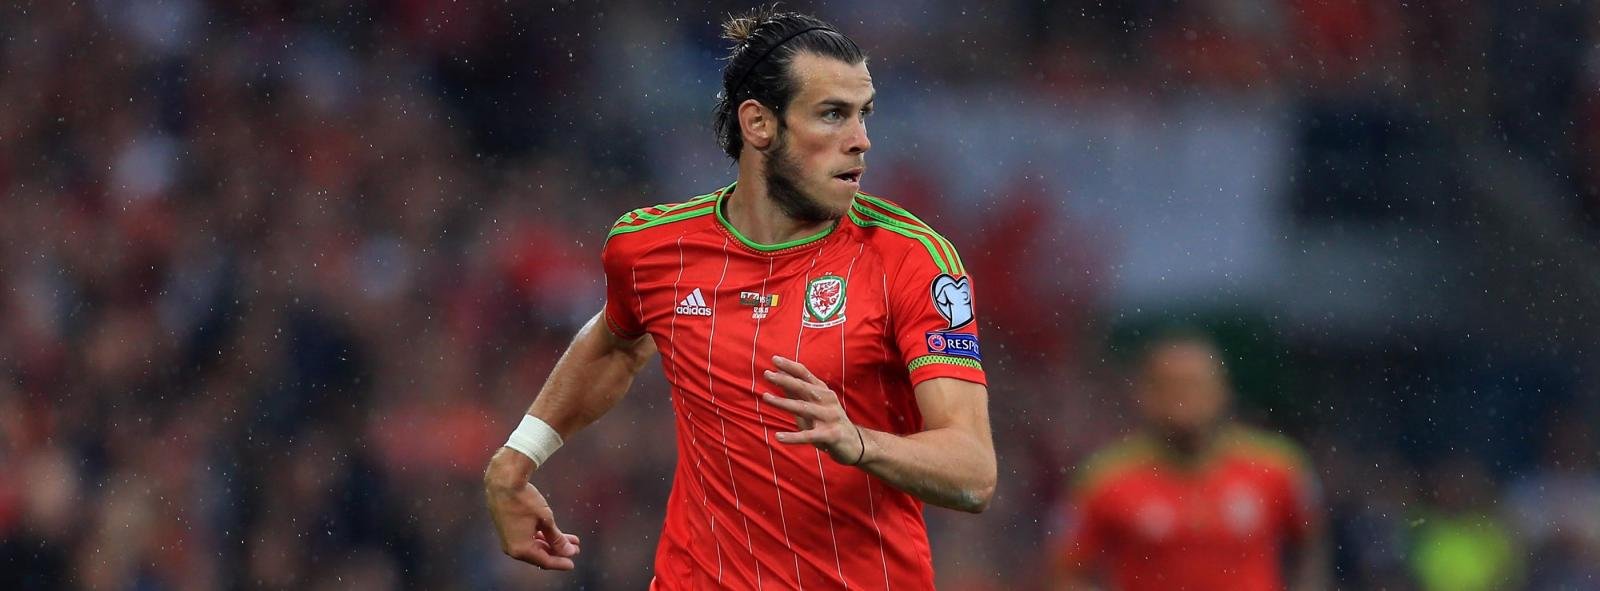 Why Gareth Bale would be a better fit for Man United than Ronaldo